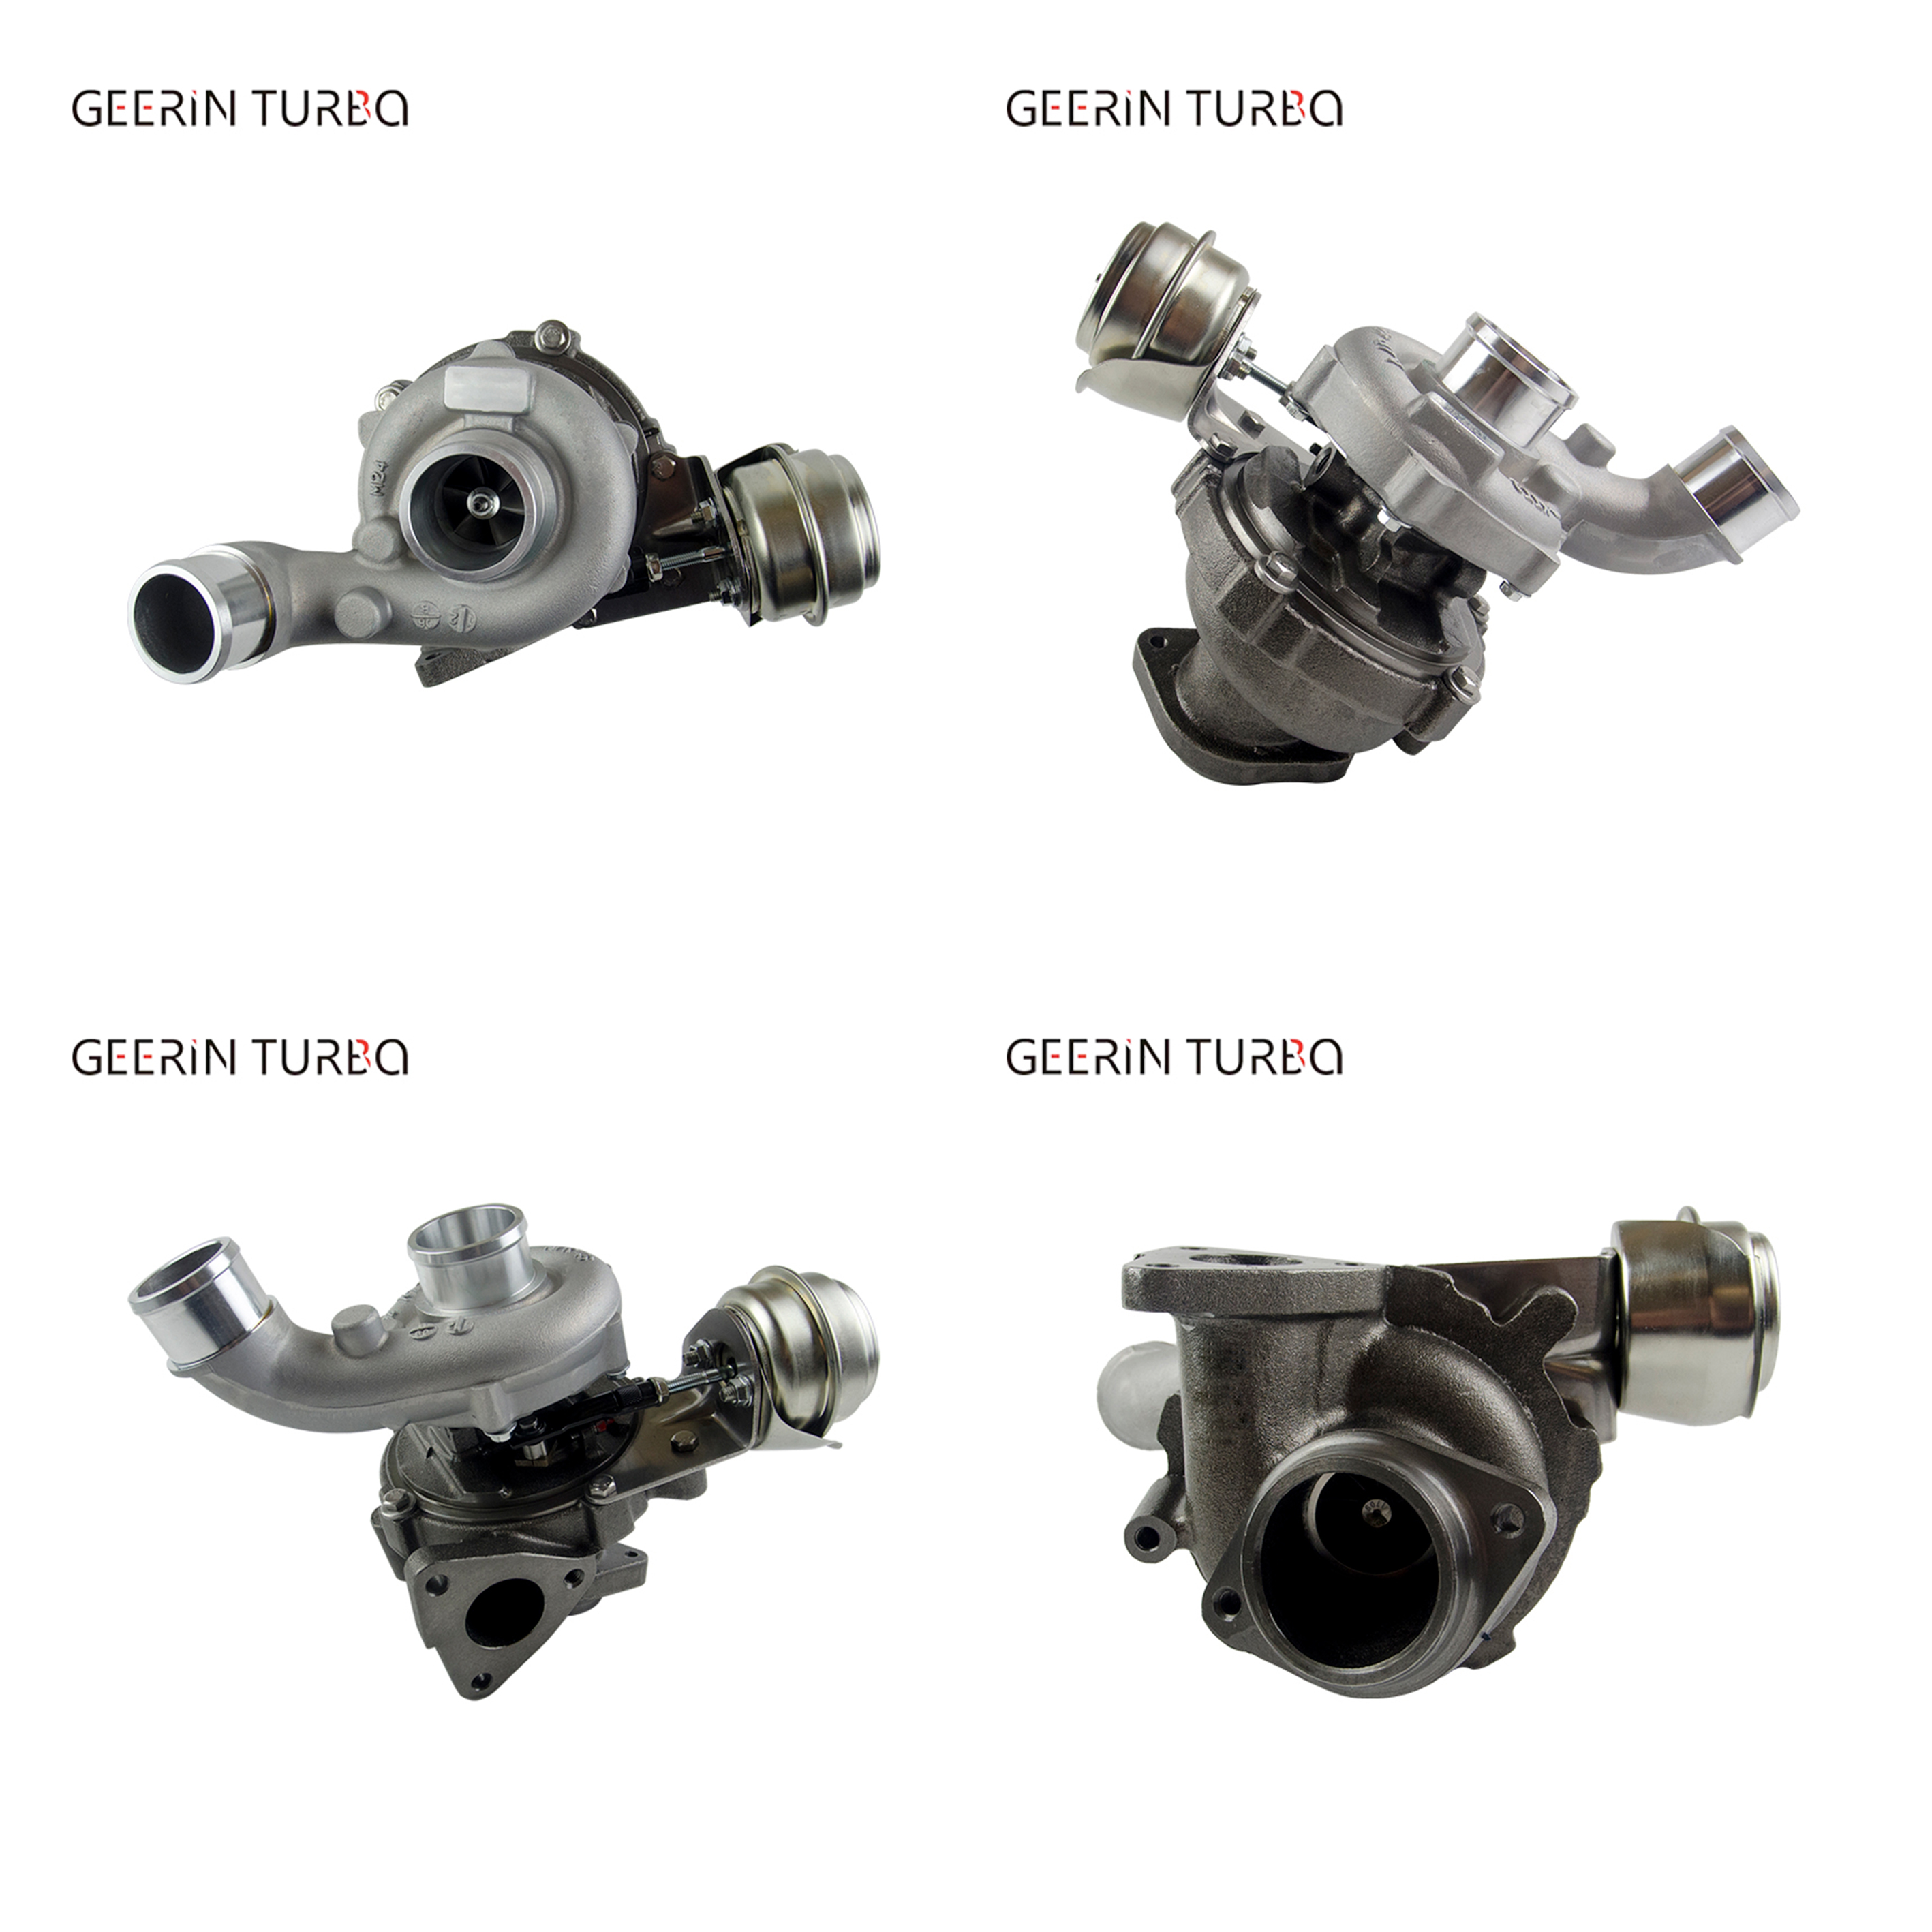 GT1549V 761433-5003S Complete Turbocharger Turbo Kit For Ssang-Yong Actyon 2.0 Xdi Factory